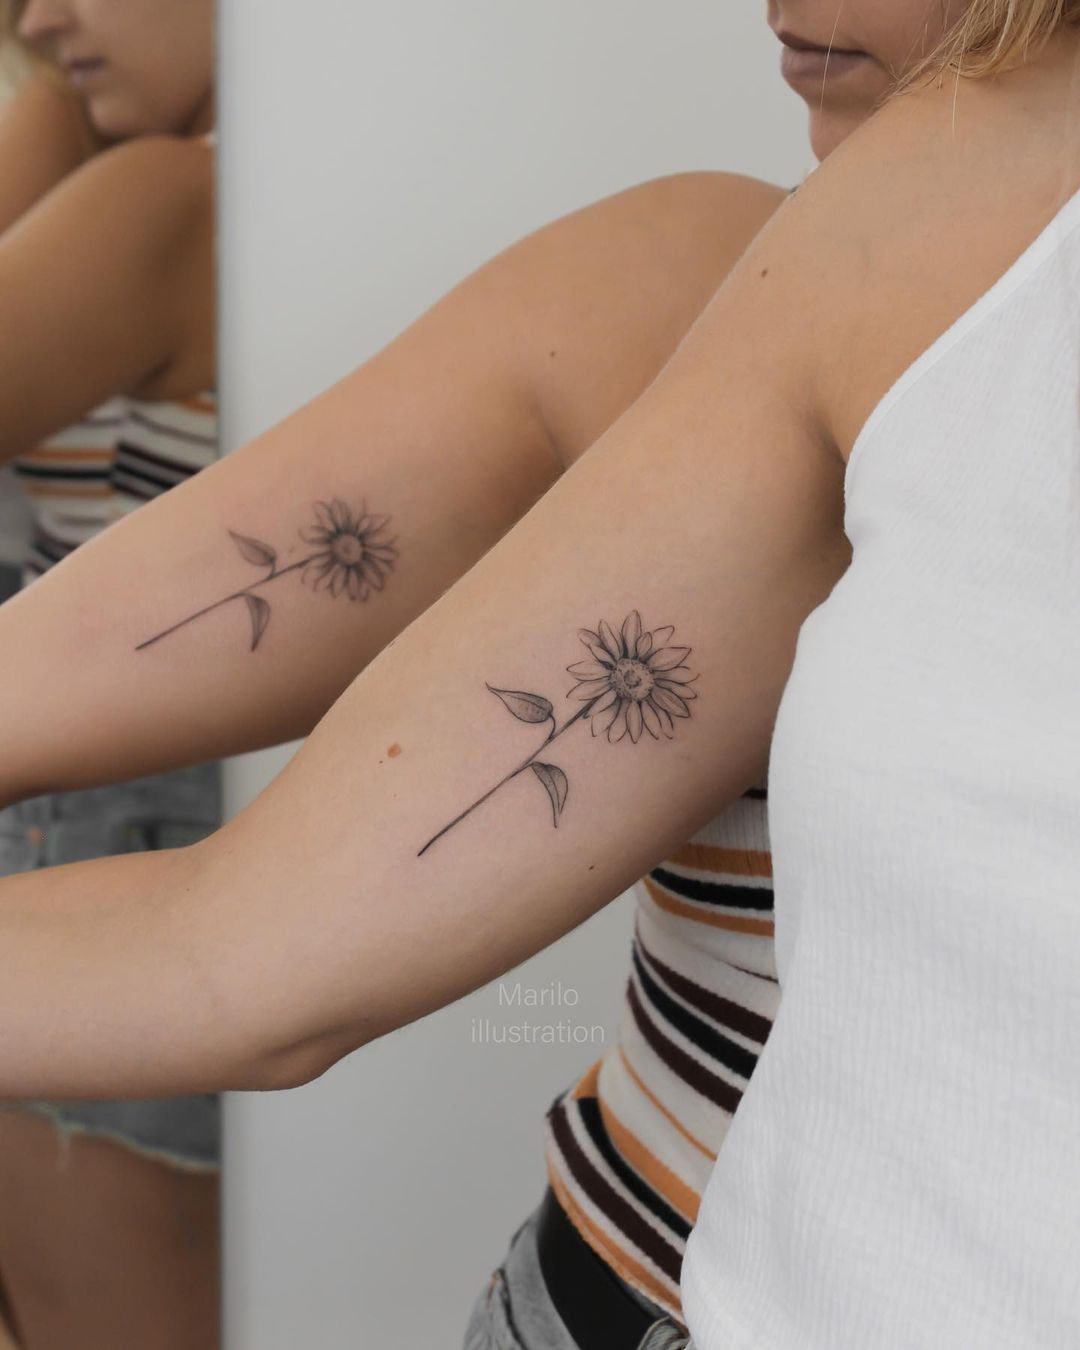 Matching tattoos Well walk everywhere together and the sun will always be  shining tattoo sunflower bestfr  Tattoos Matching tattoos Sister  tattoo designs